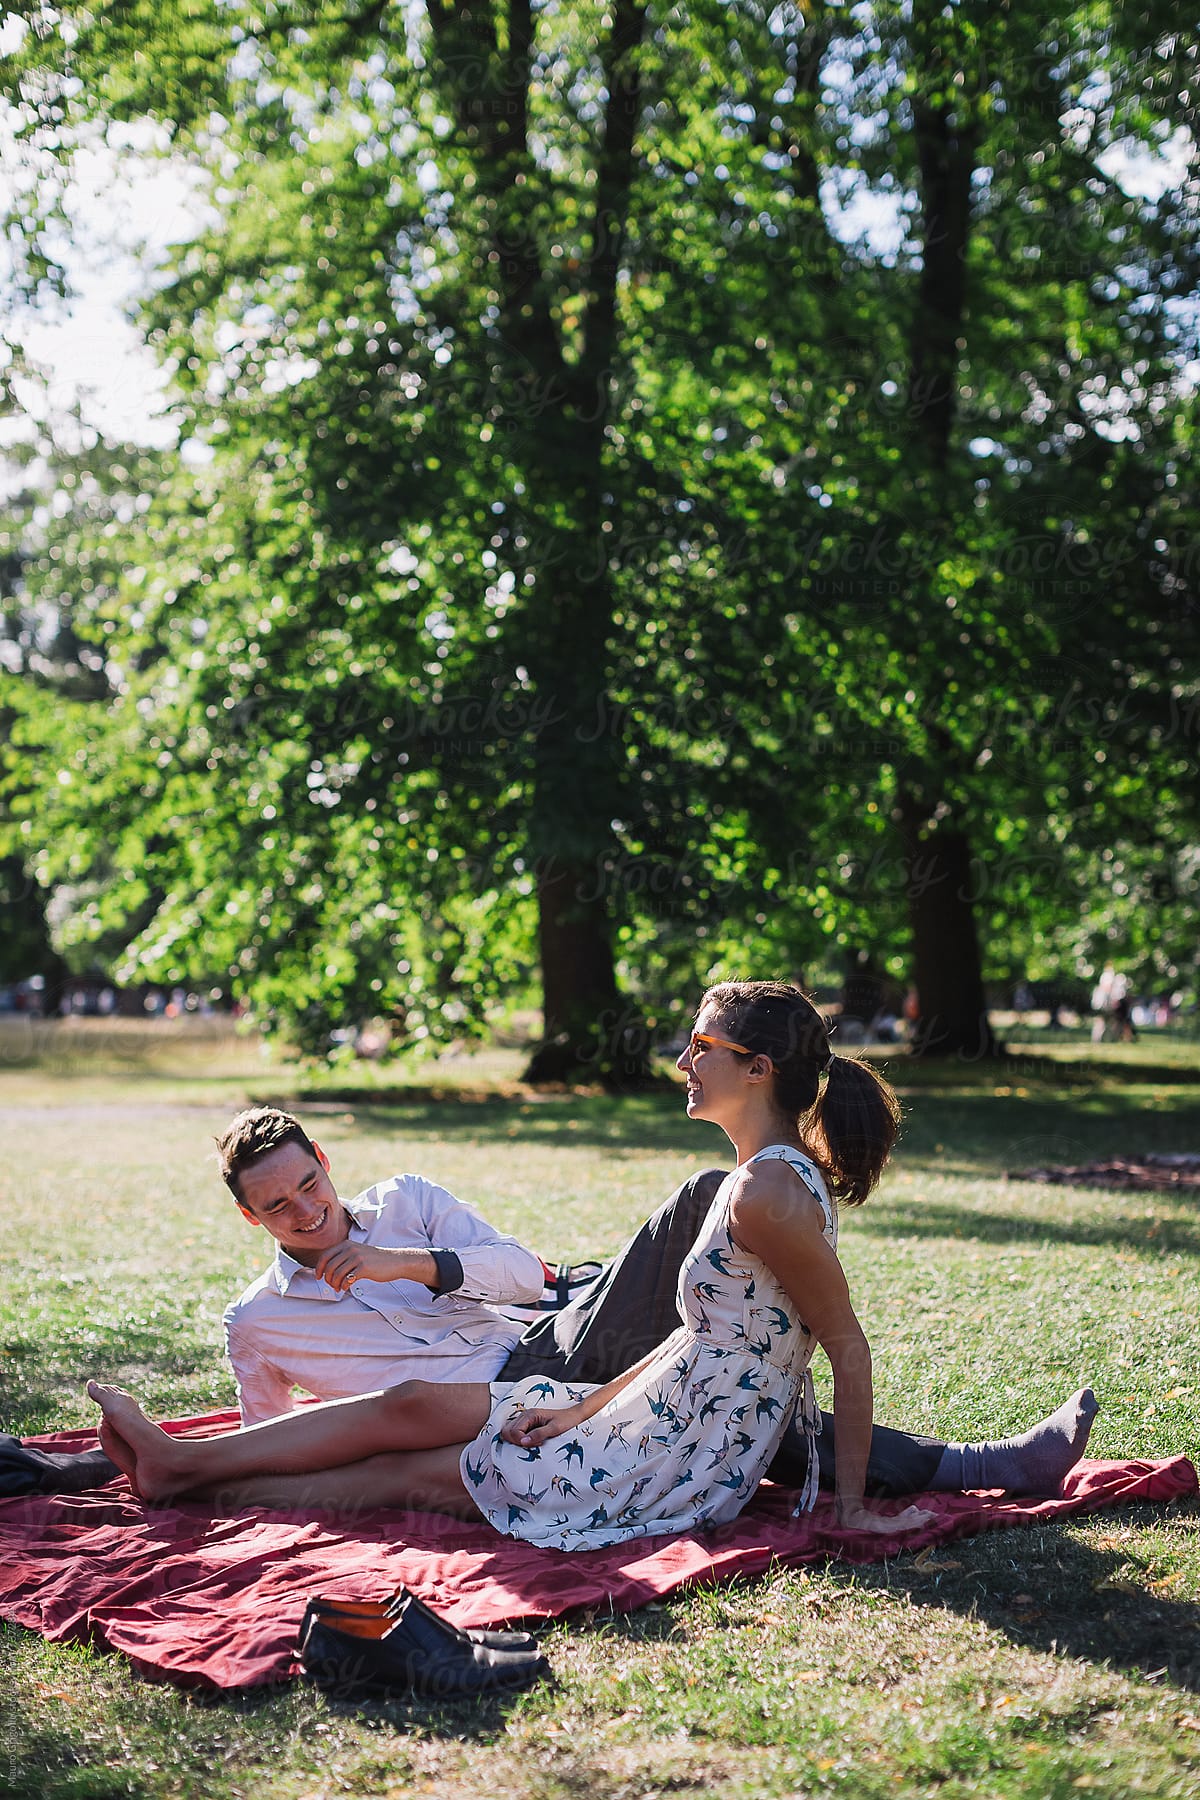 Lovers Relax And Have Fun In A Park By Stocksy Contributor Mauro Grigollo Stocksy